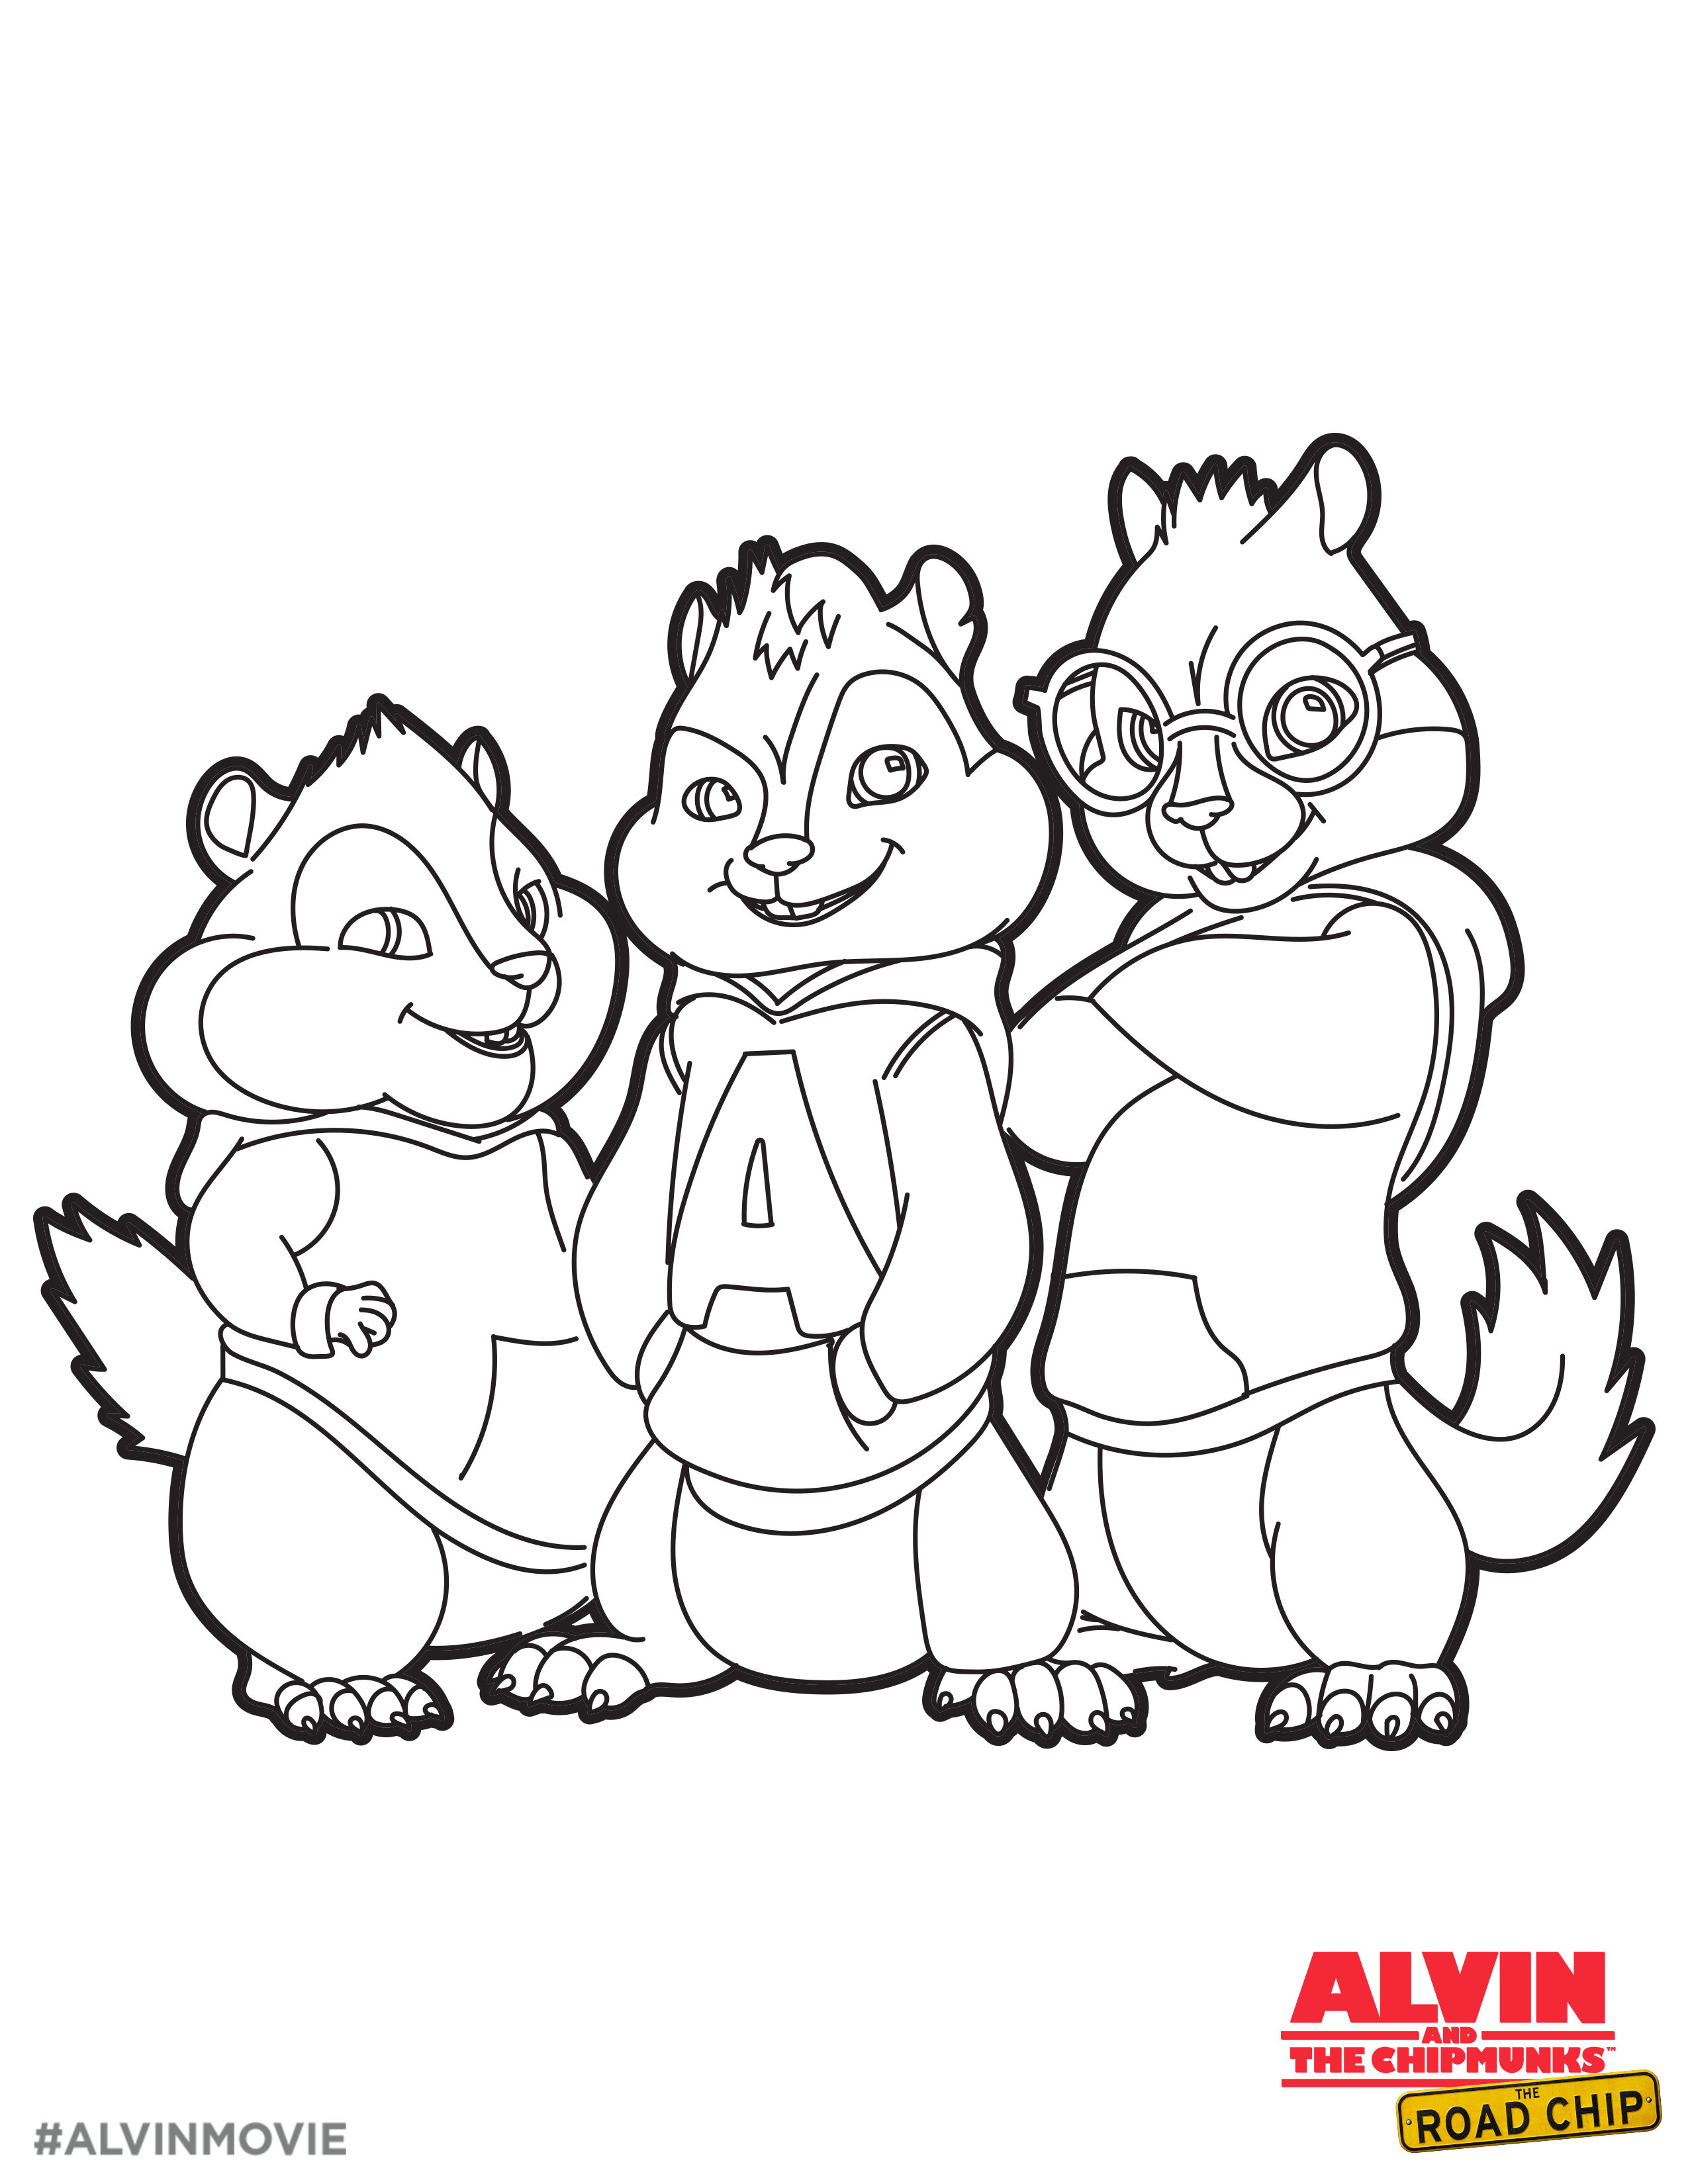 Alvin and the Chipmunks Free Coloring Printable Alvin and the